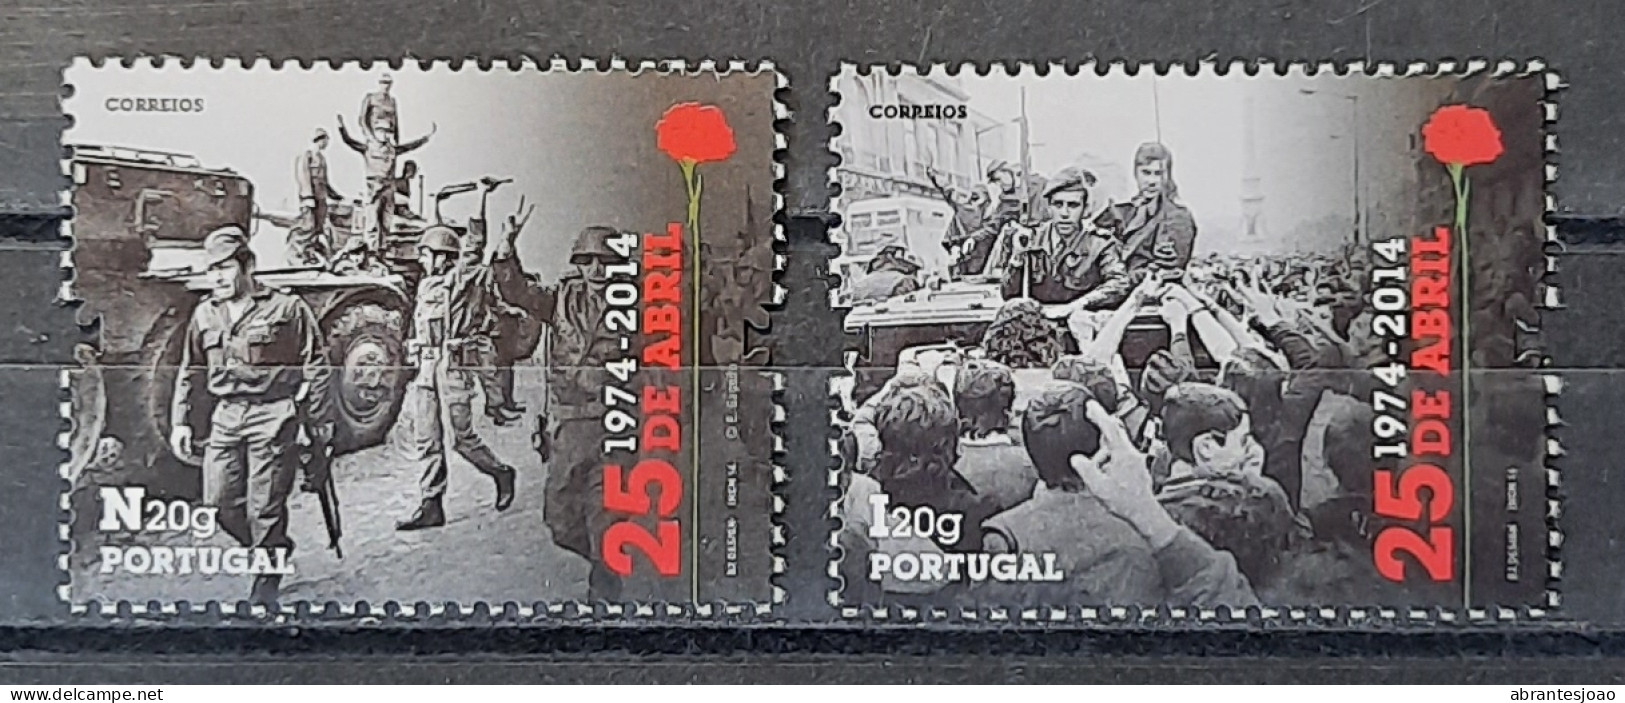 2014 - Portugal - 40 Years Of 25th April Revolution - MNH - 2 Stamps + Souvenir Sheet Of 1 Stamp - Ongebruikt